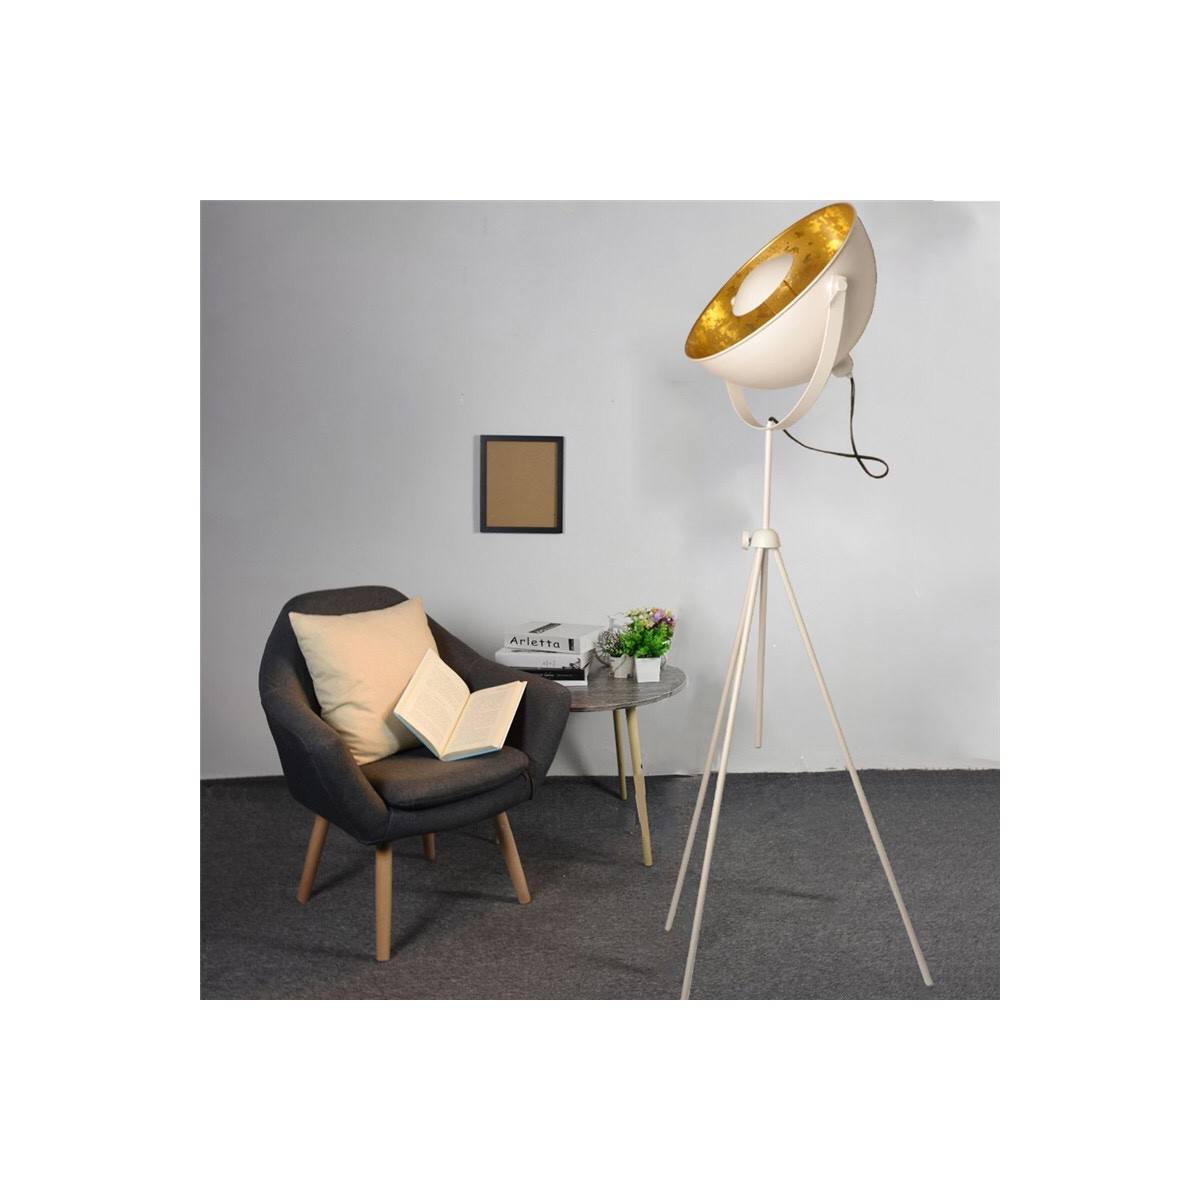 Vintage floor lamps with tripod